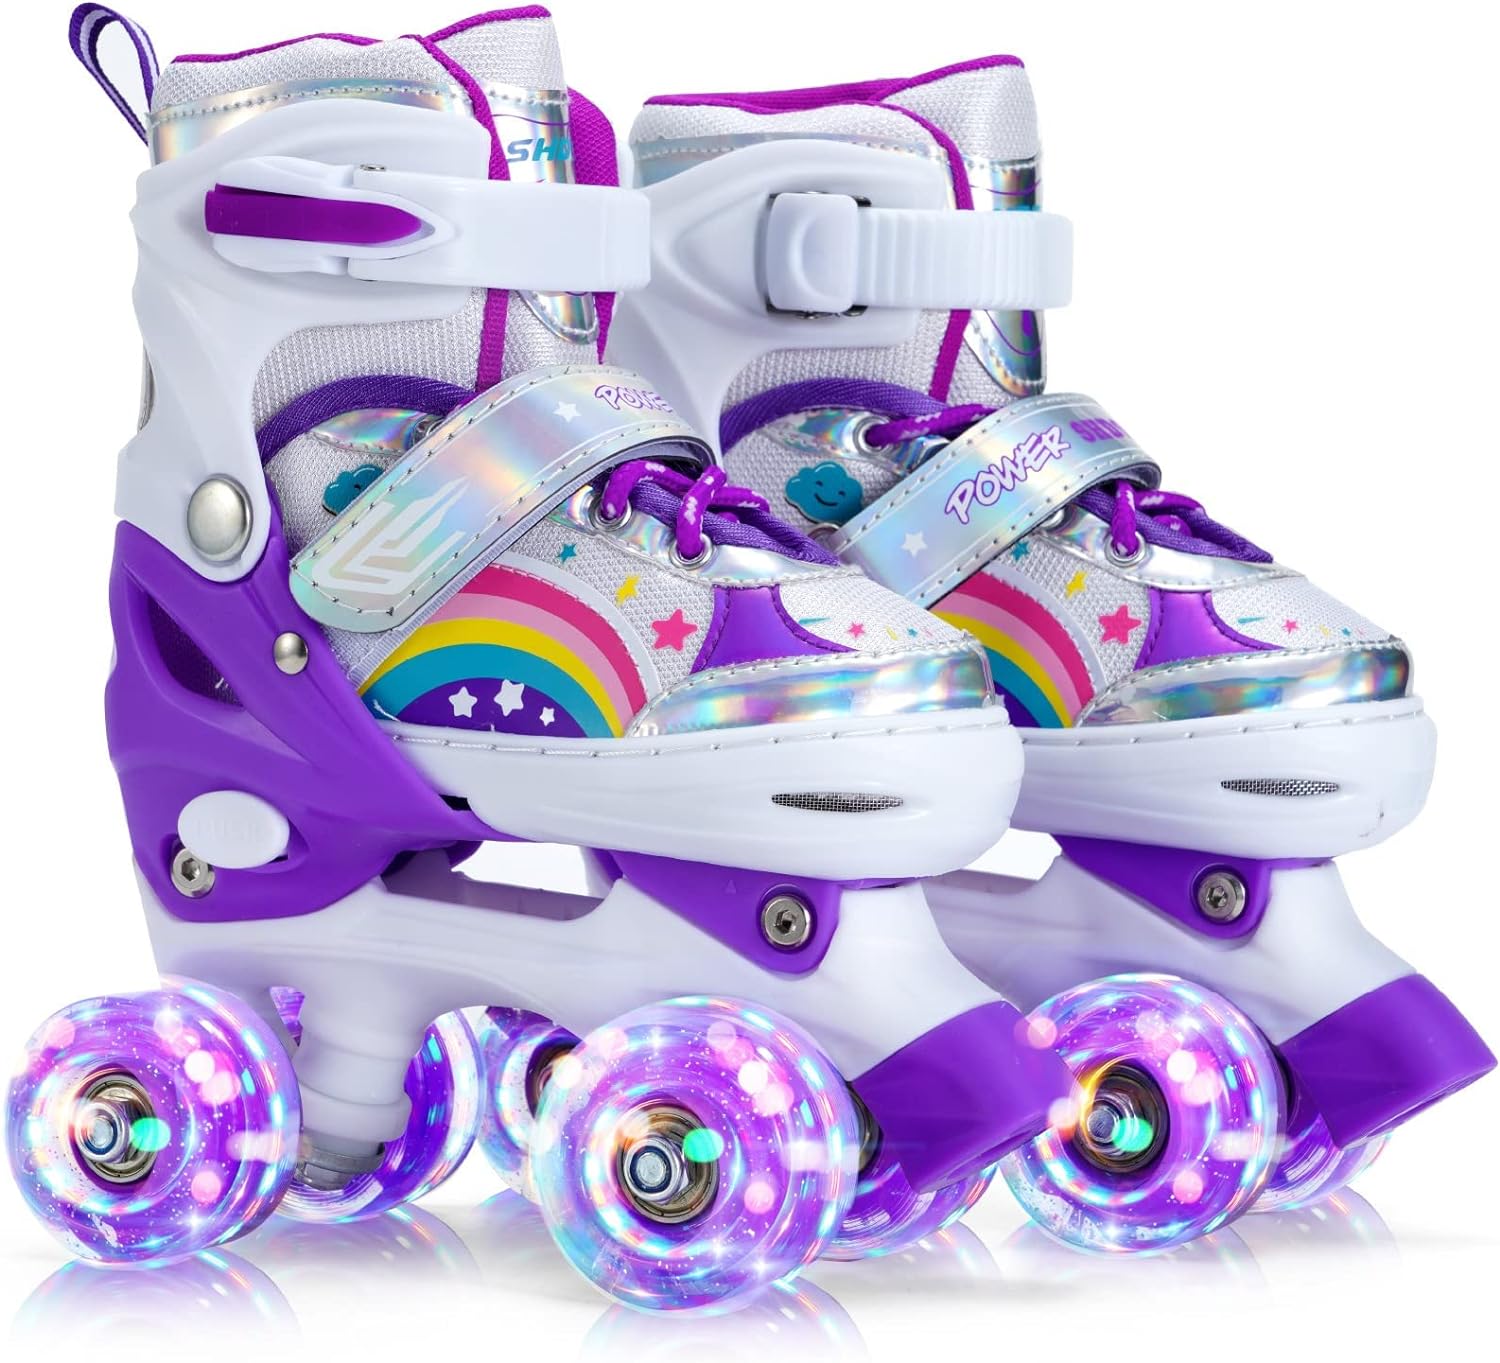 My 6 year old loves these roller skates. The colors are fun and the wheels light up. So far she has worn them to the roller rink and outside. They still look great after a few months of constant use. I like that they will adjust in size as her feet grow to allow her to wear them longer.